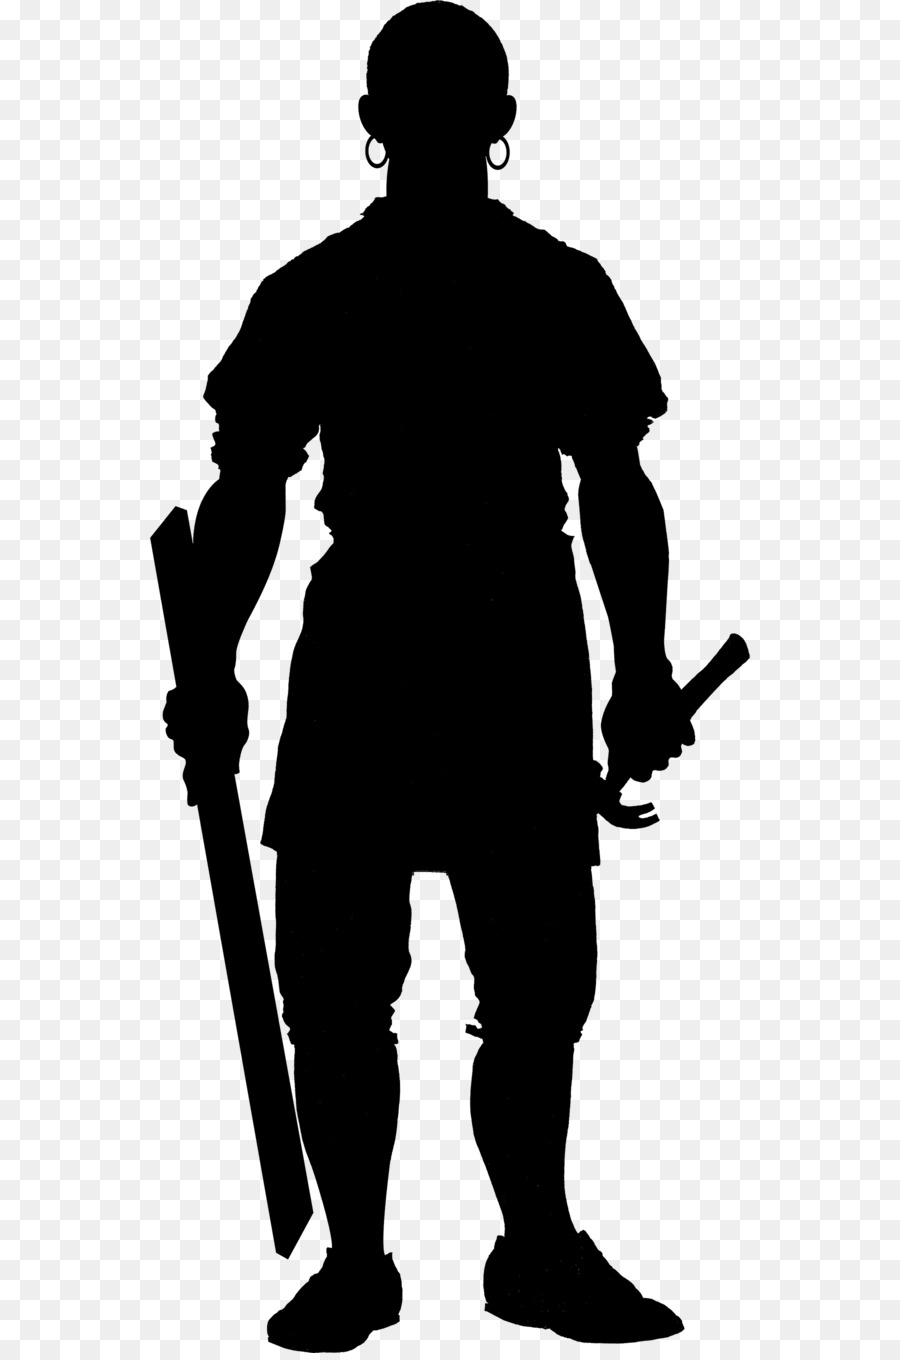 Mount Vernon Silhouette Person - Silhouette png download - 1800*2706 - Free Transparent  png Download.